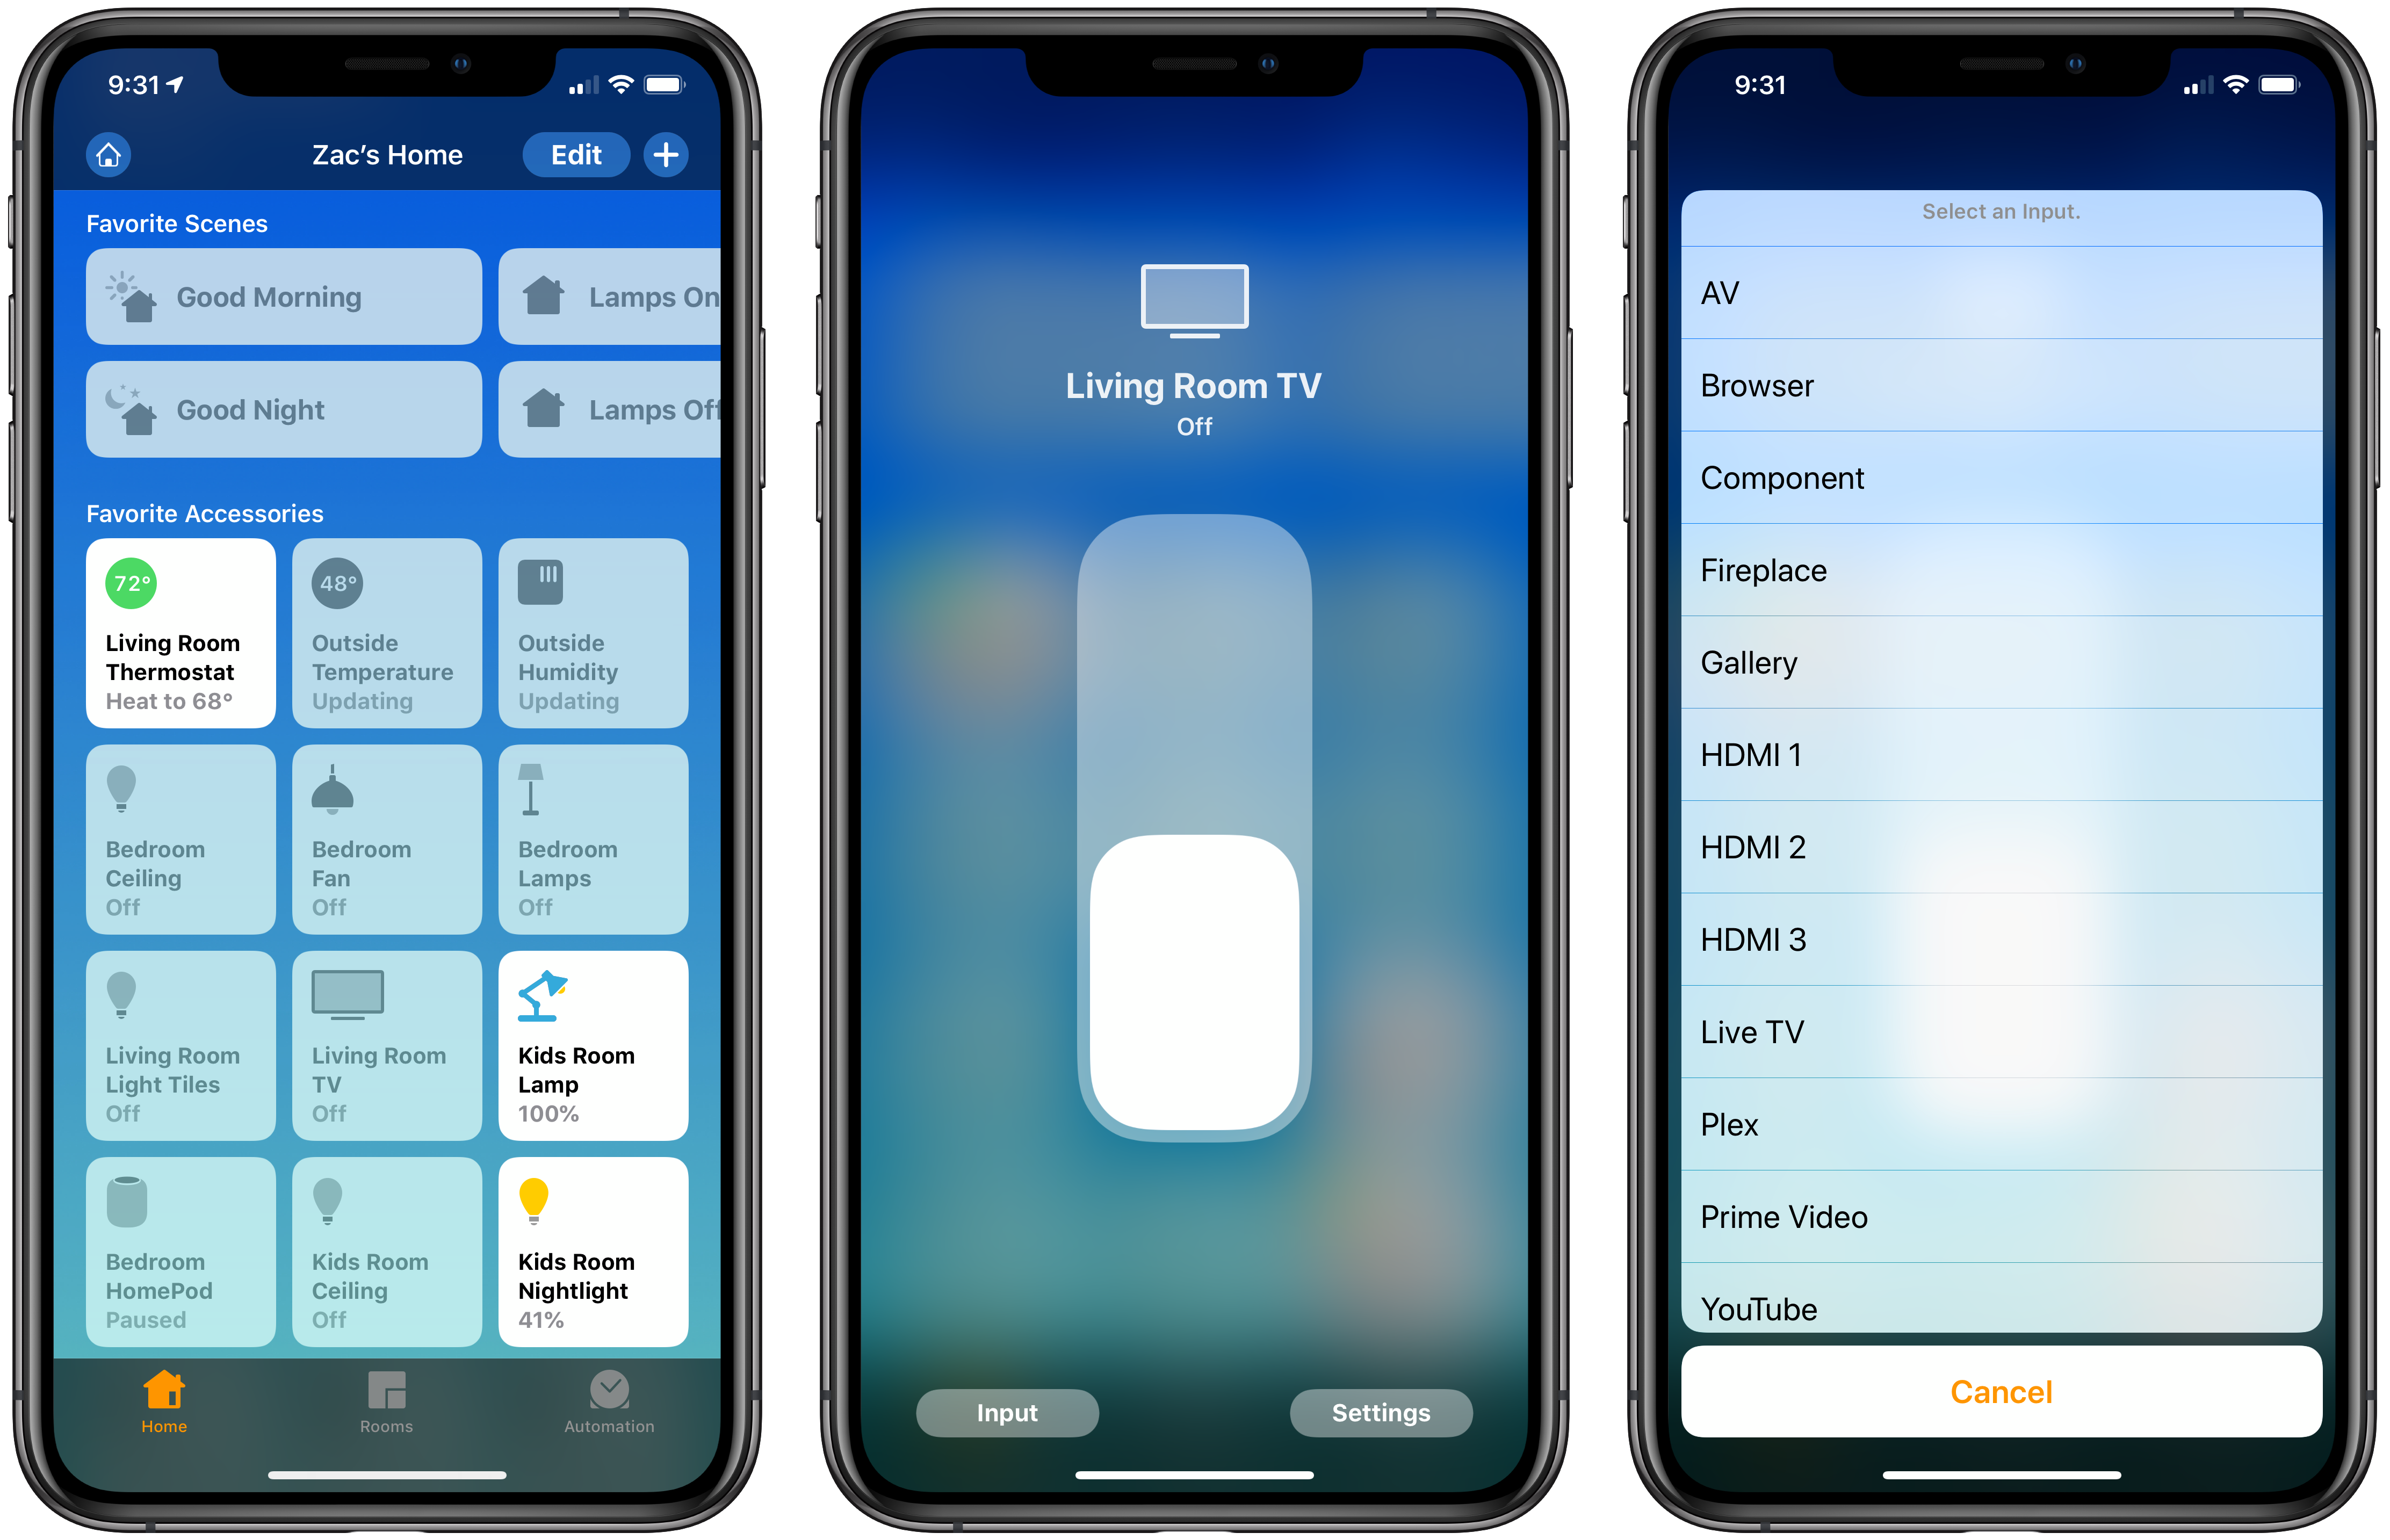 Slutning Tak for din hjælp prosa HomeKit Weekly: Previewing TV support in the Home app on iOS 12.2 - 9to5Mac